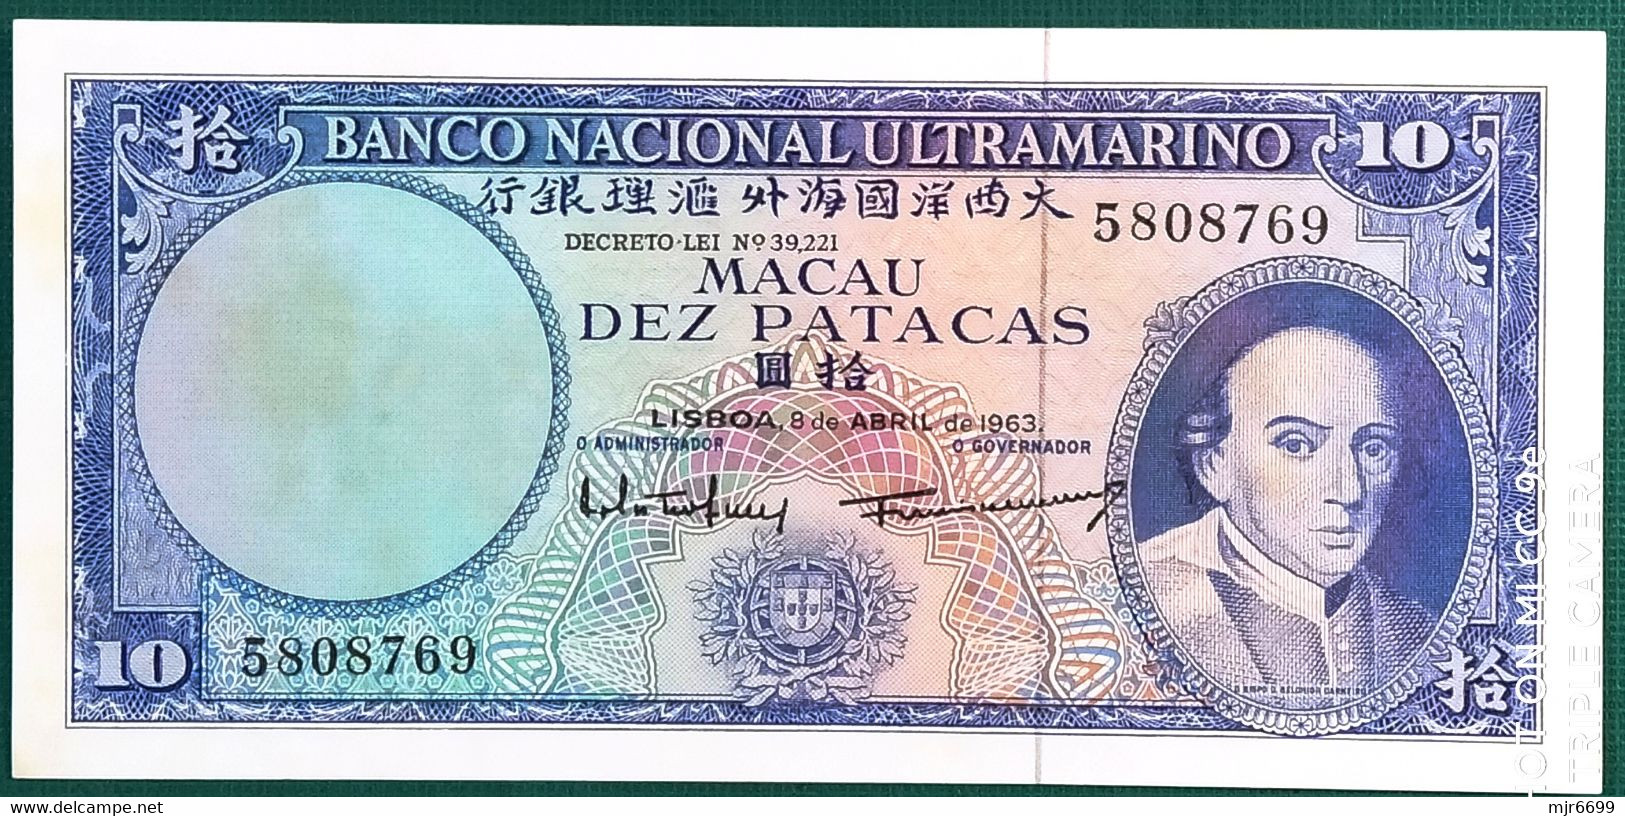 MACAU 1963 BANK NOTE 10 PATACAS UNCIRCULATED BUT TONING ON BACK, SEE PHOTO - Macao